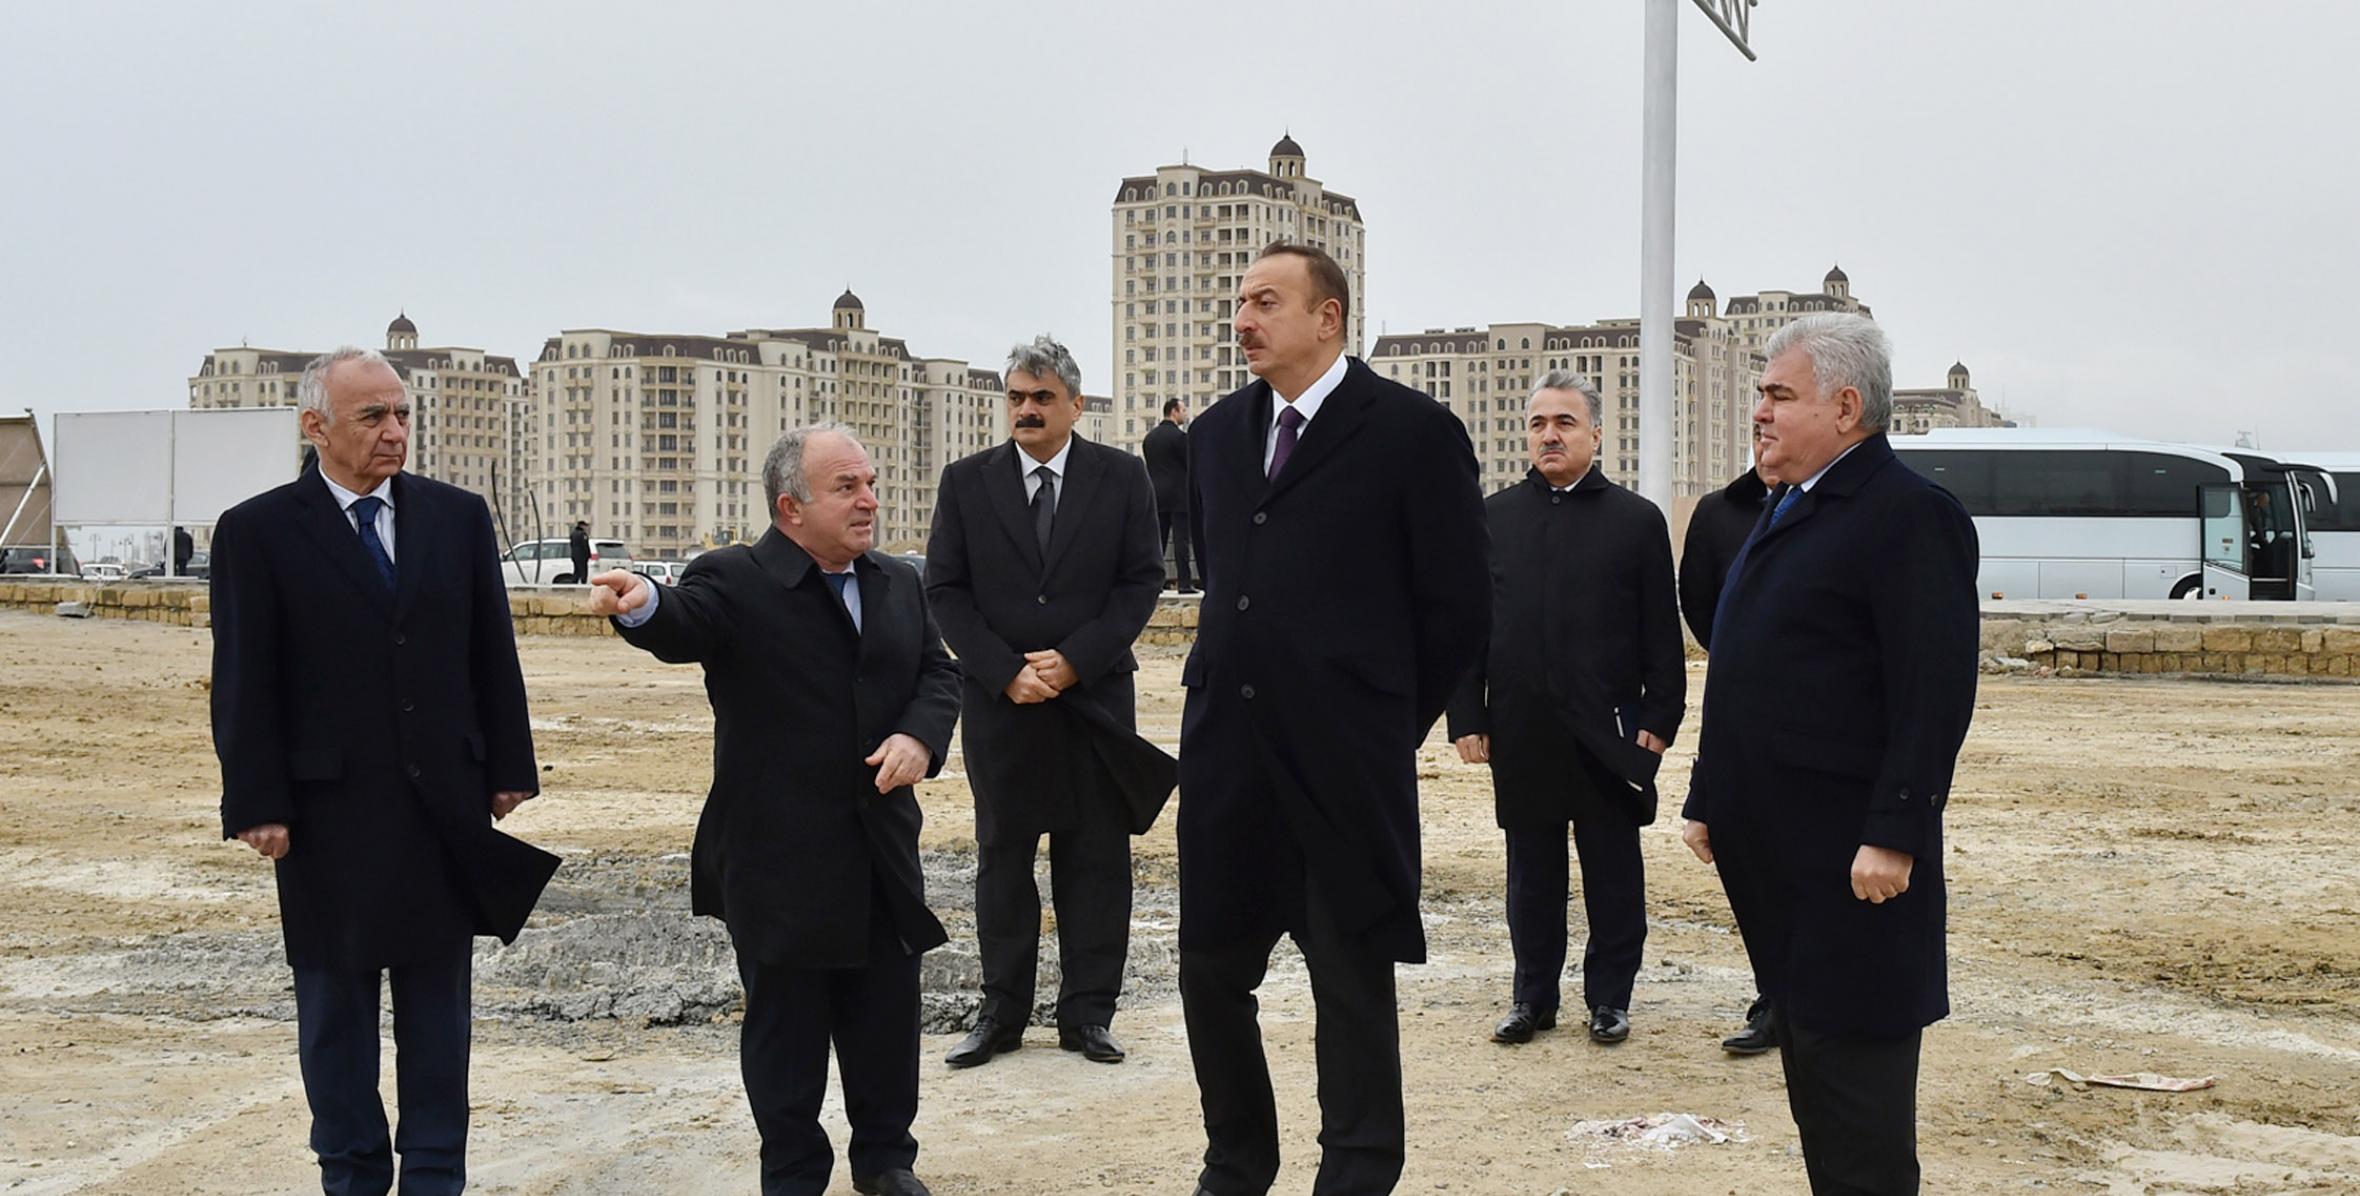 Ilham Aliyev reviewed the preparatory work for the first European Games